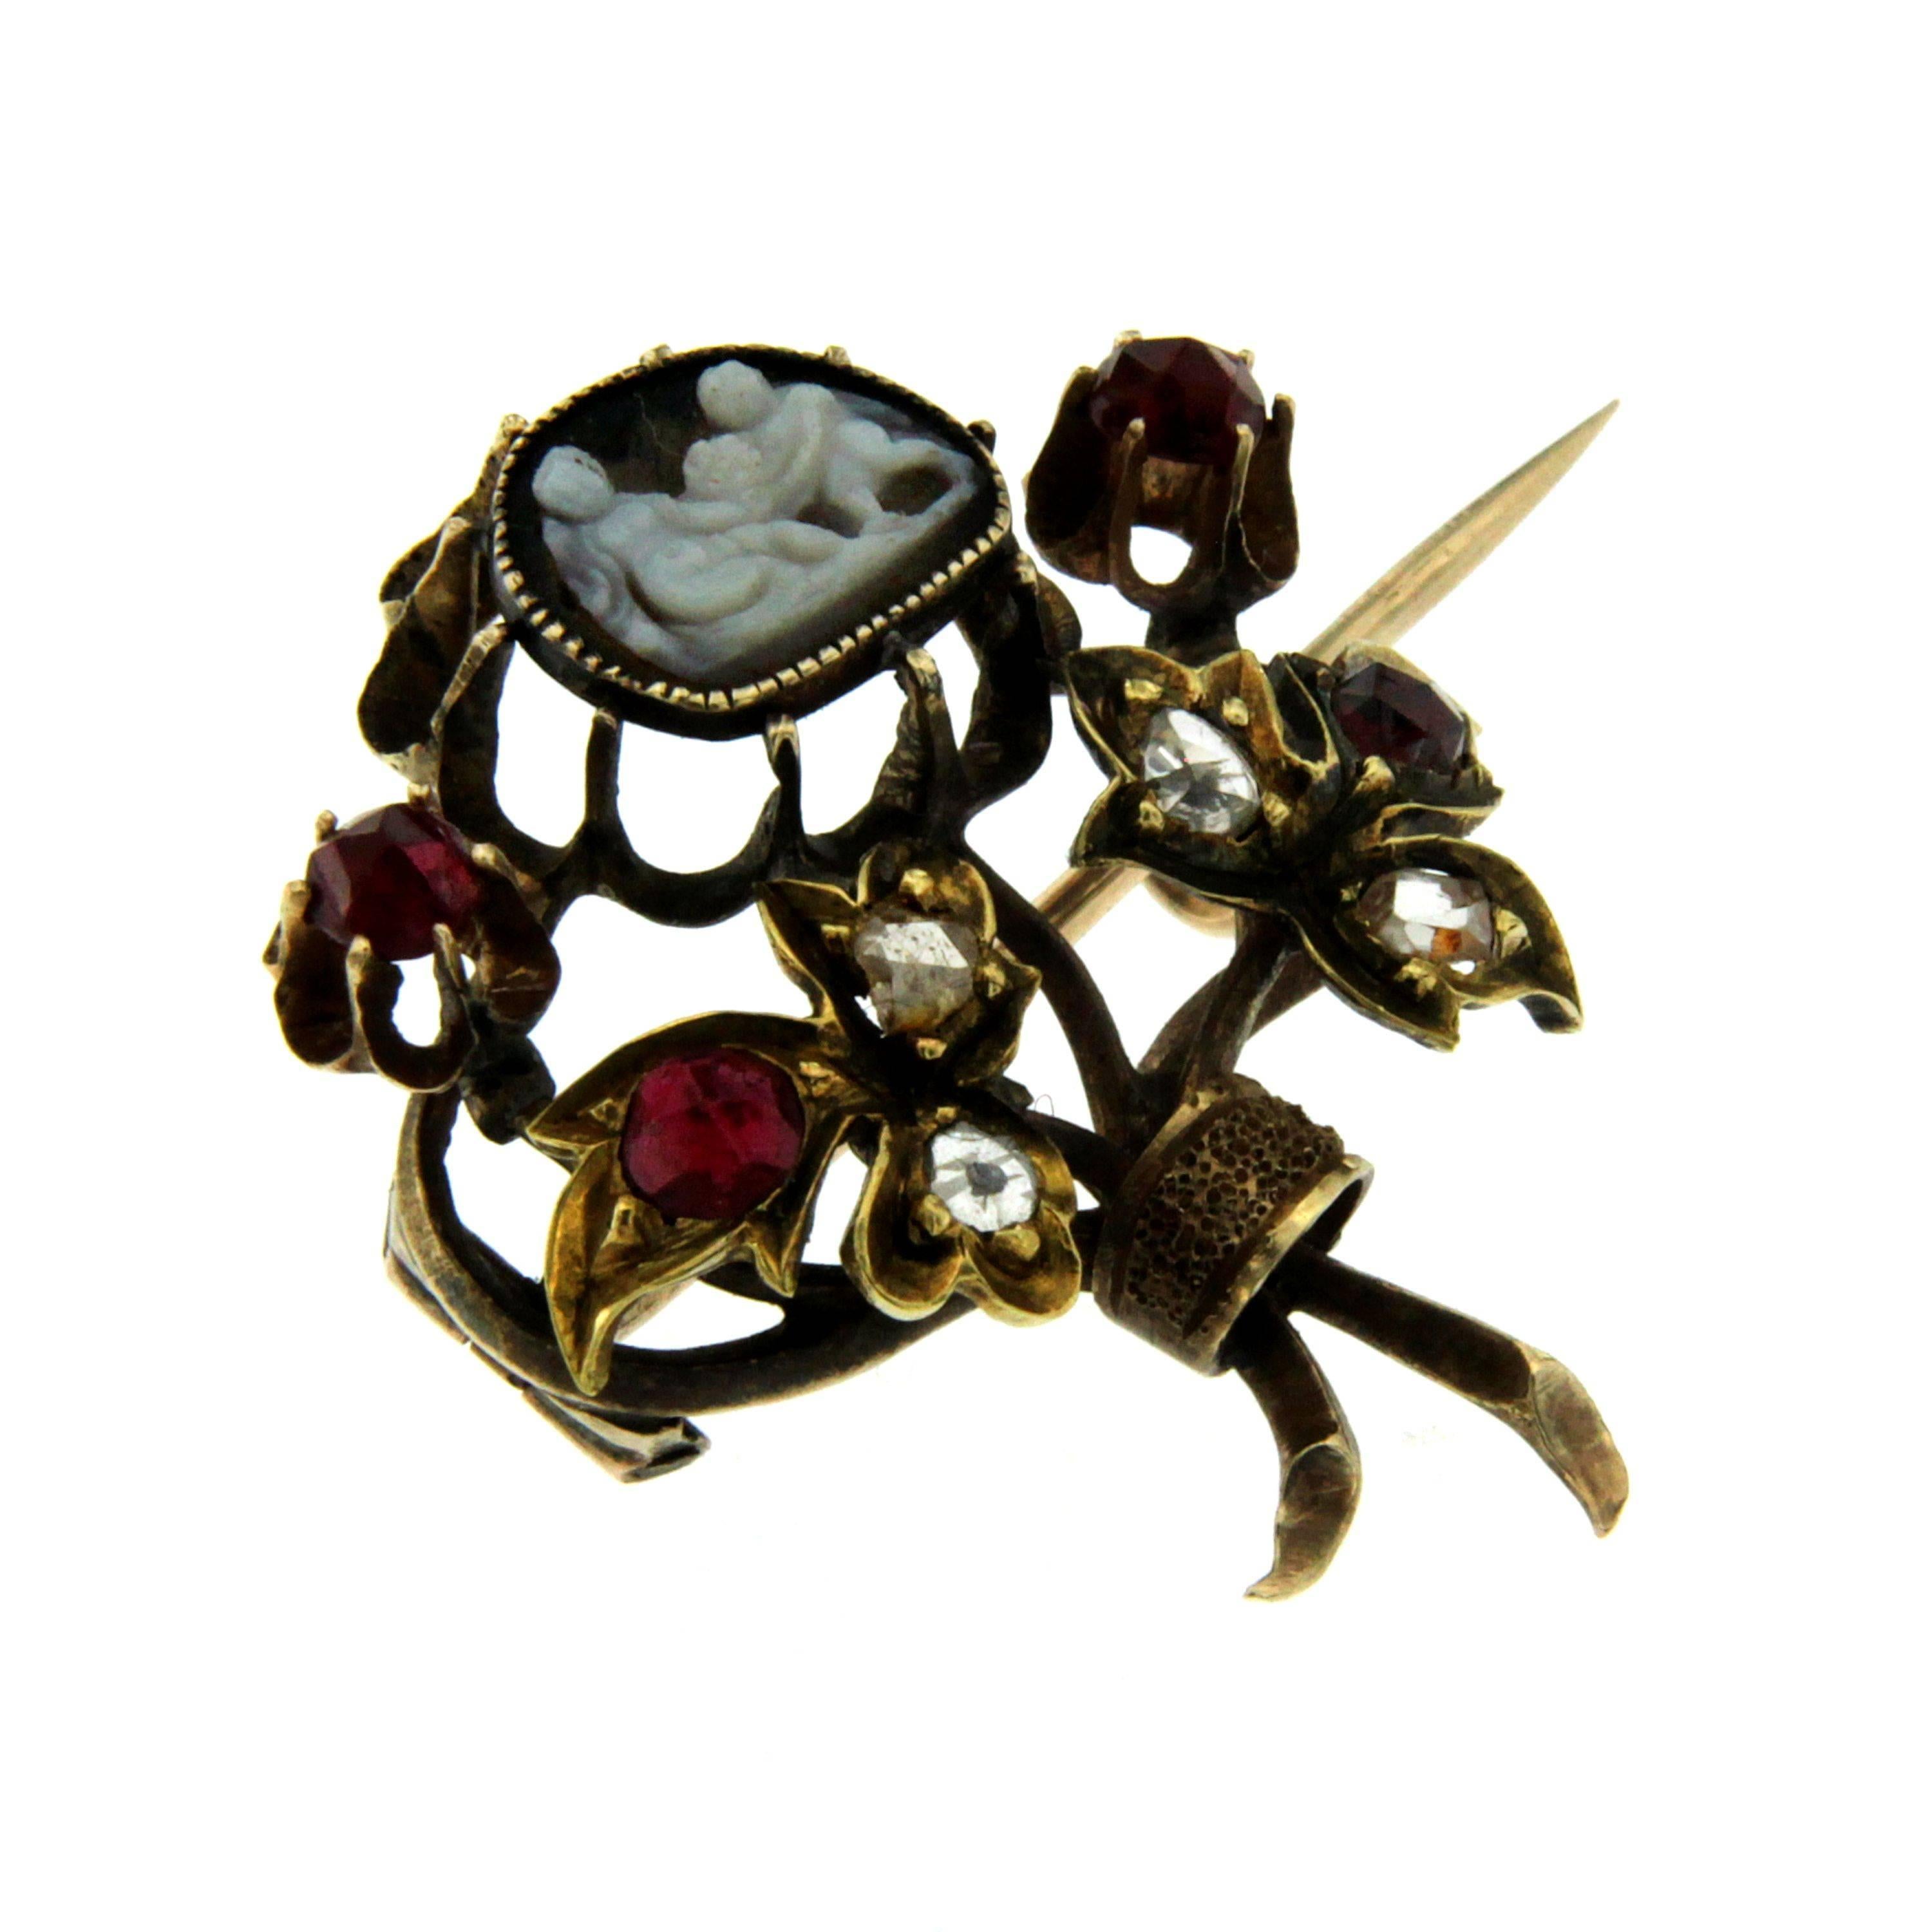 Exquisite authentic Georgian brooch, dates 1800' - Origin England
It features a flowers bouquet with a shell cameo in the center and all around rose cut Diamonds and red gems.

This unique piece is designed and crafted entirely by hand in the